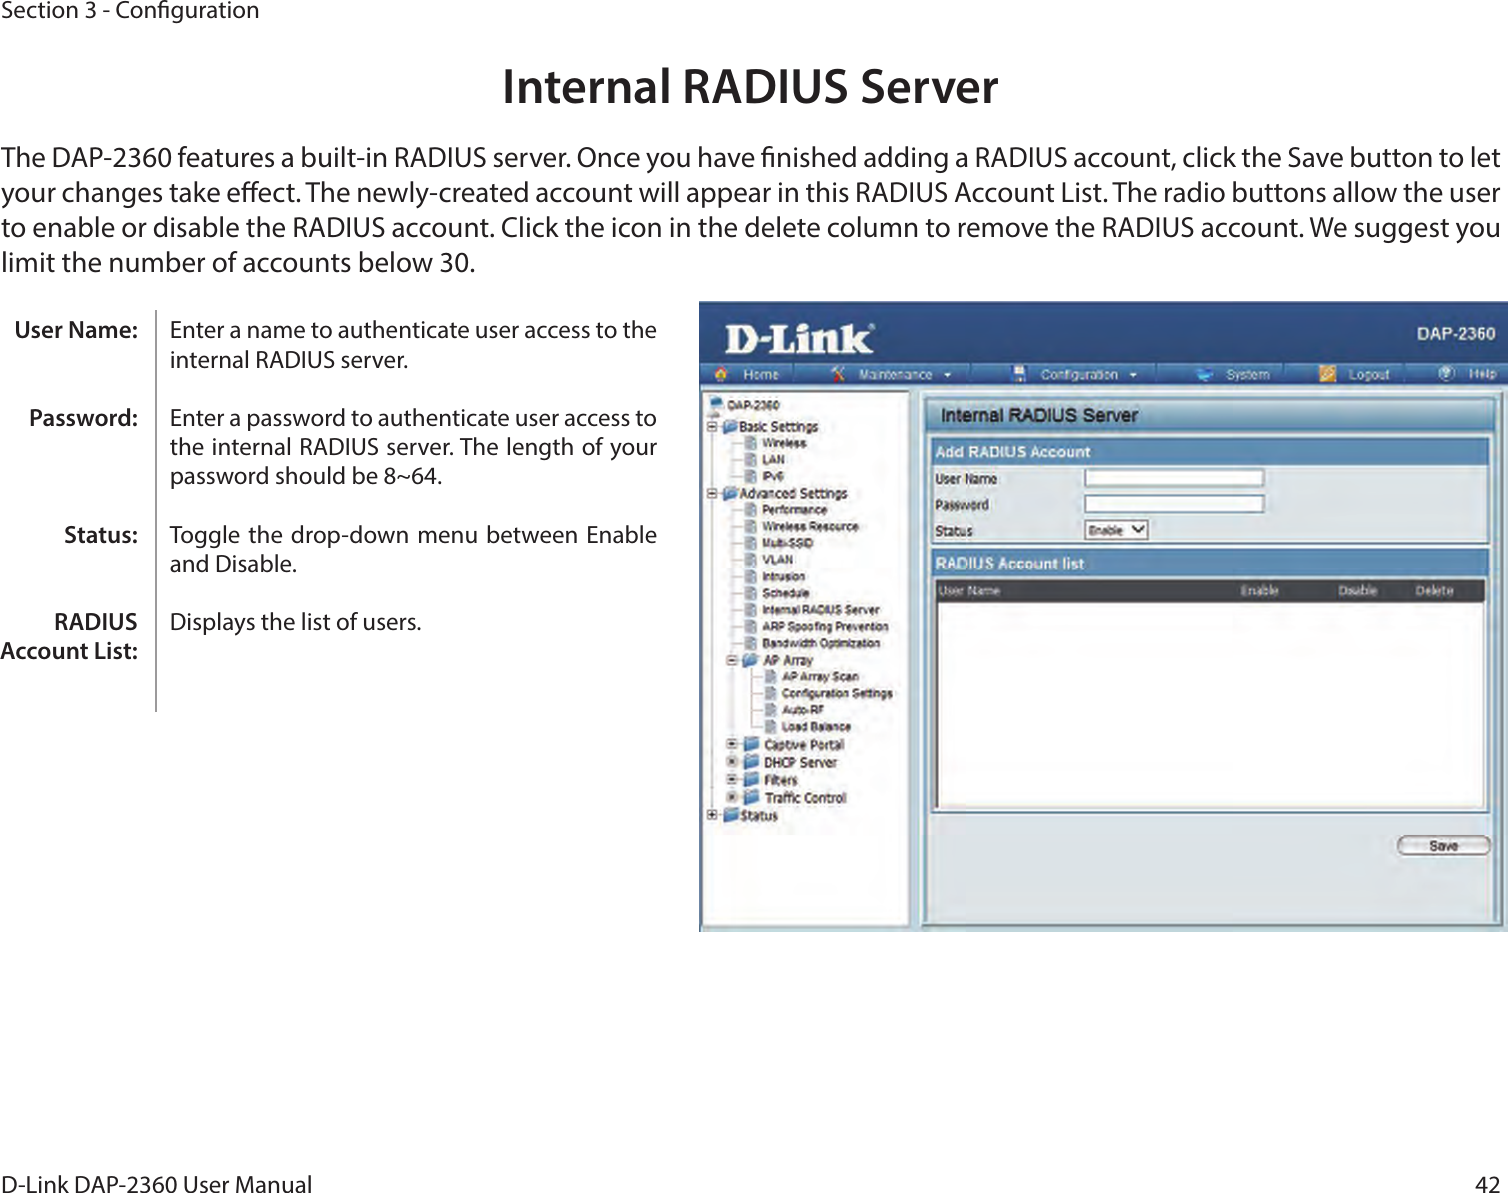 42D-Link DAP-2360 User ManualSection 3 - CongurationInternal RADIUS ServerThe DAP-2360 features a built-in RADIUS server. Once you have nished adding a RADIUS account, click the Save button to let your changes take eect. The newly-created account will appear in this RADIUS Account List. The radio buttons allow the user to enable or disable the RADIUS account. Click the icon in the delete column to remove the RADIUS account. We suggest you limit the number of accounts below 30.Enter a name to authenticate user access to the internal RADIUS server.Enter a password to authenticate user access to the internal RADIUS server. The length of your password should be 8~64.Toggle the  drop-down menu between Enable and Disable.Displays the list of users. User Name:Password:Status:RADIUS Account List: